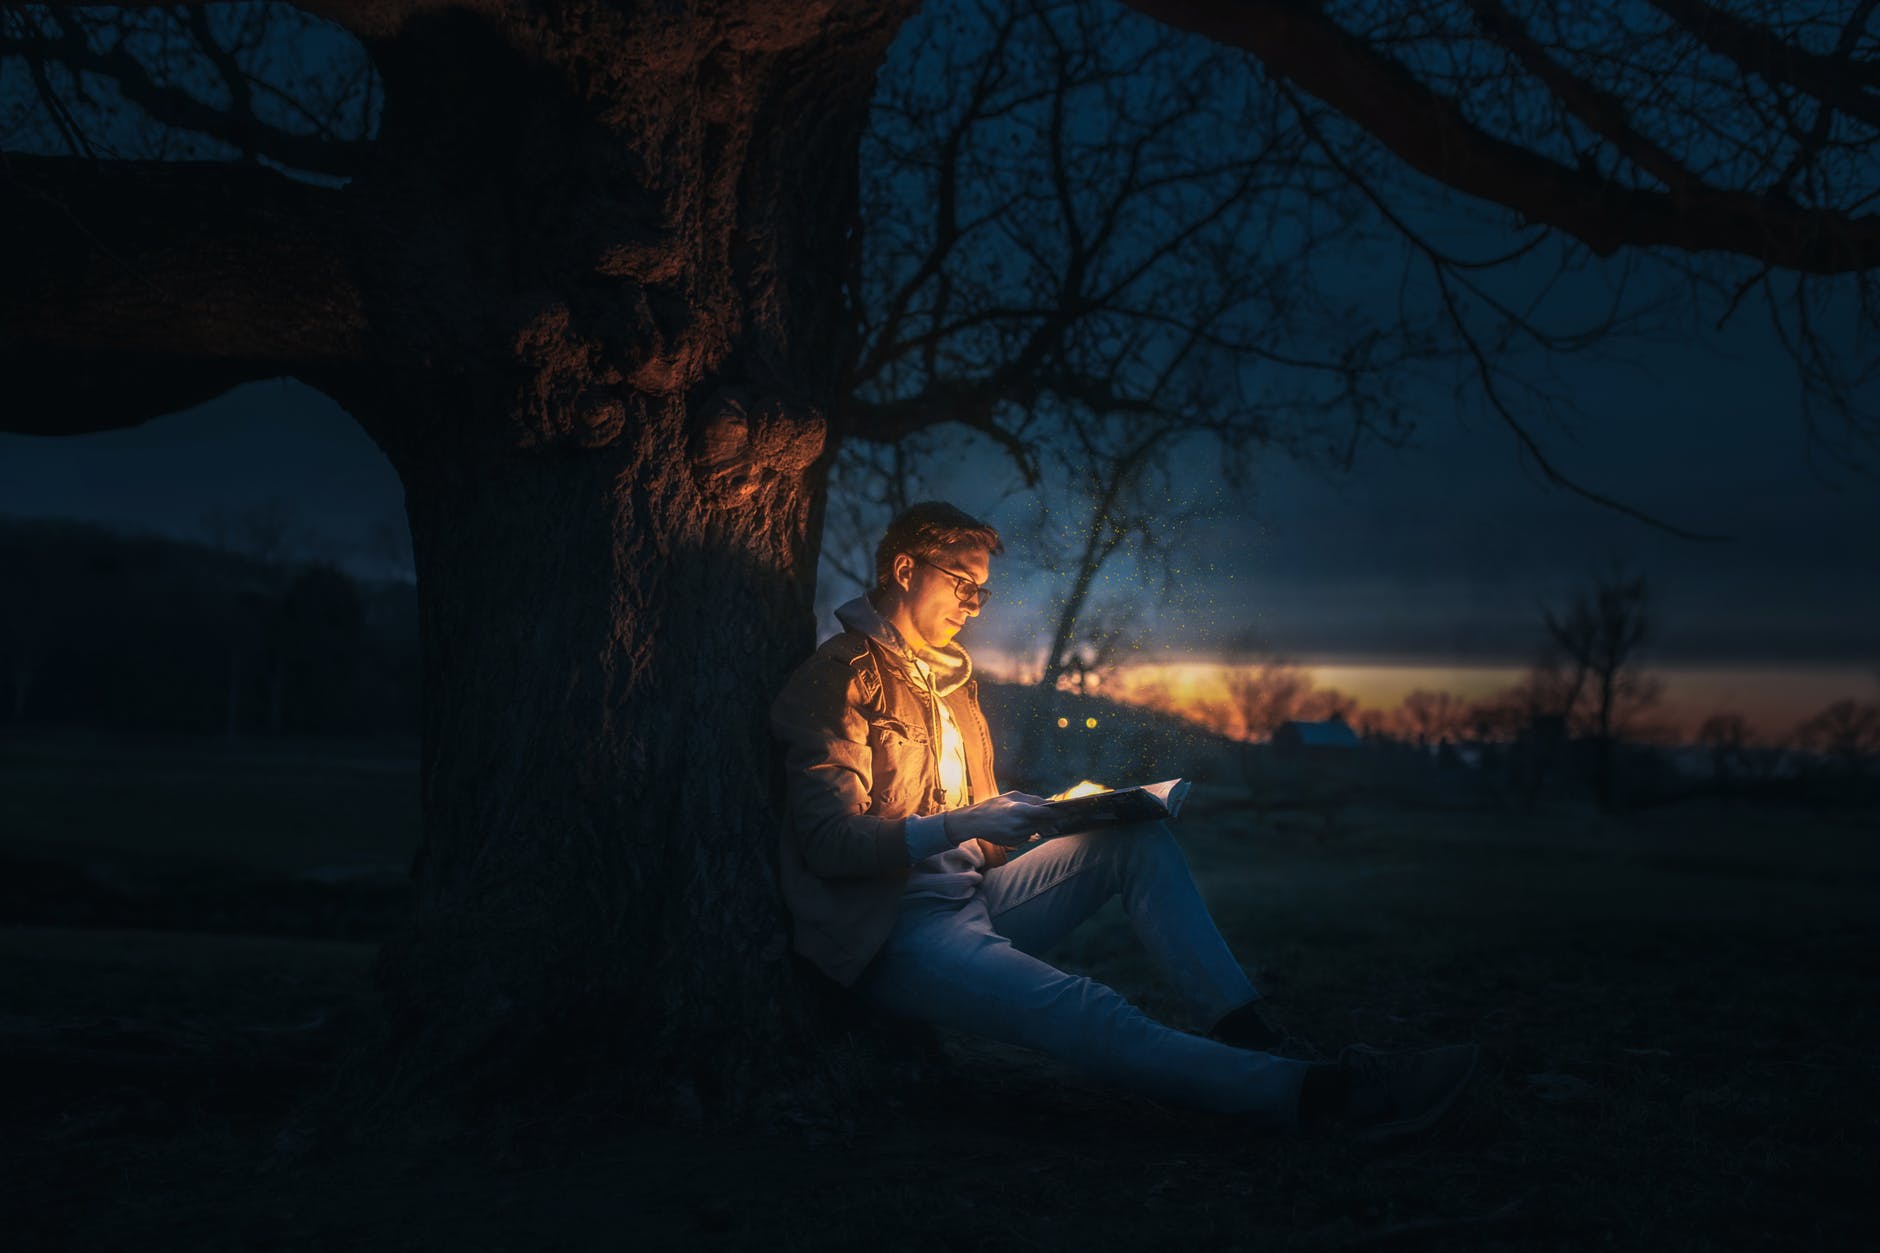 man sitting under a tree reading a book during night time